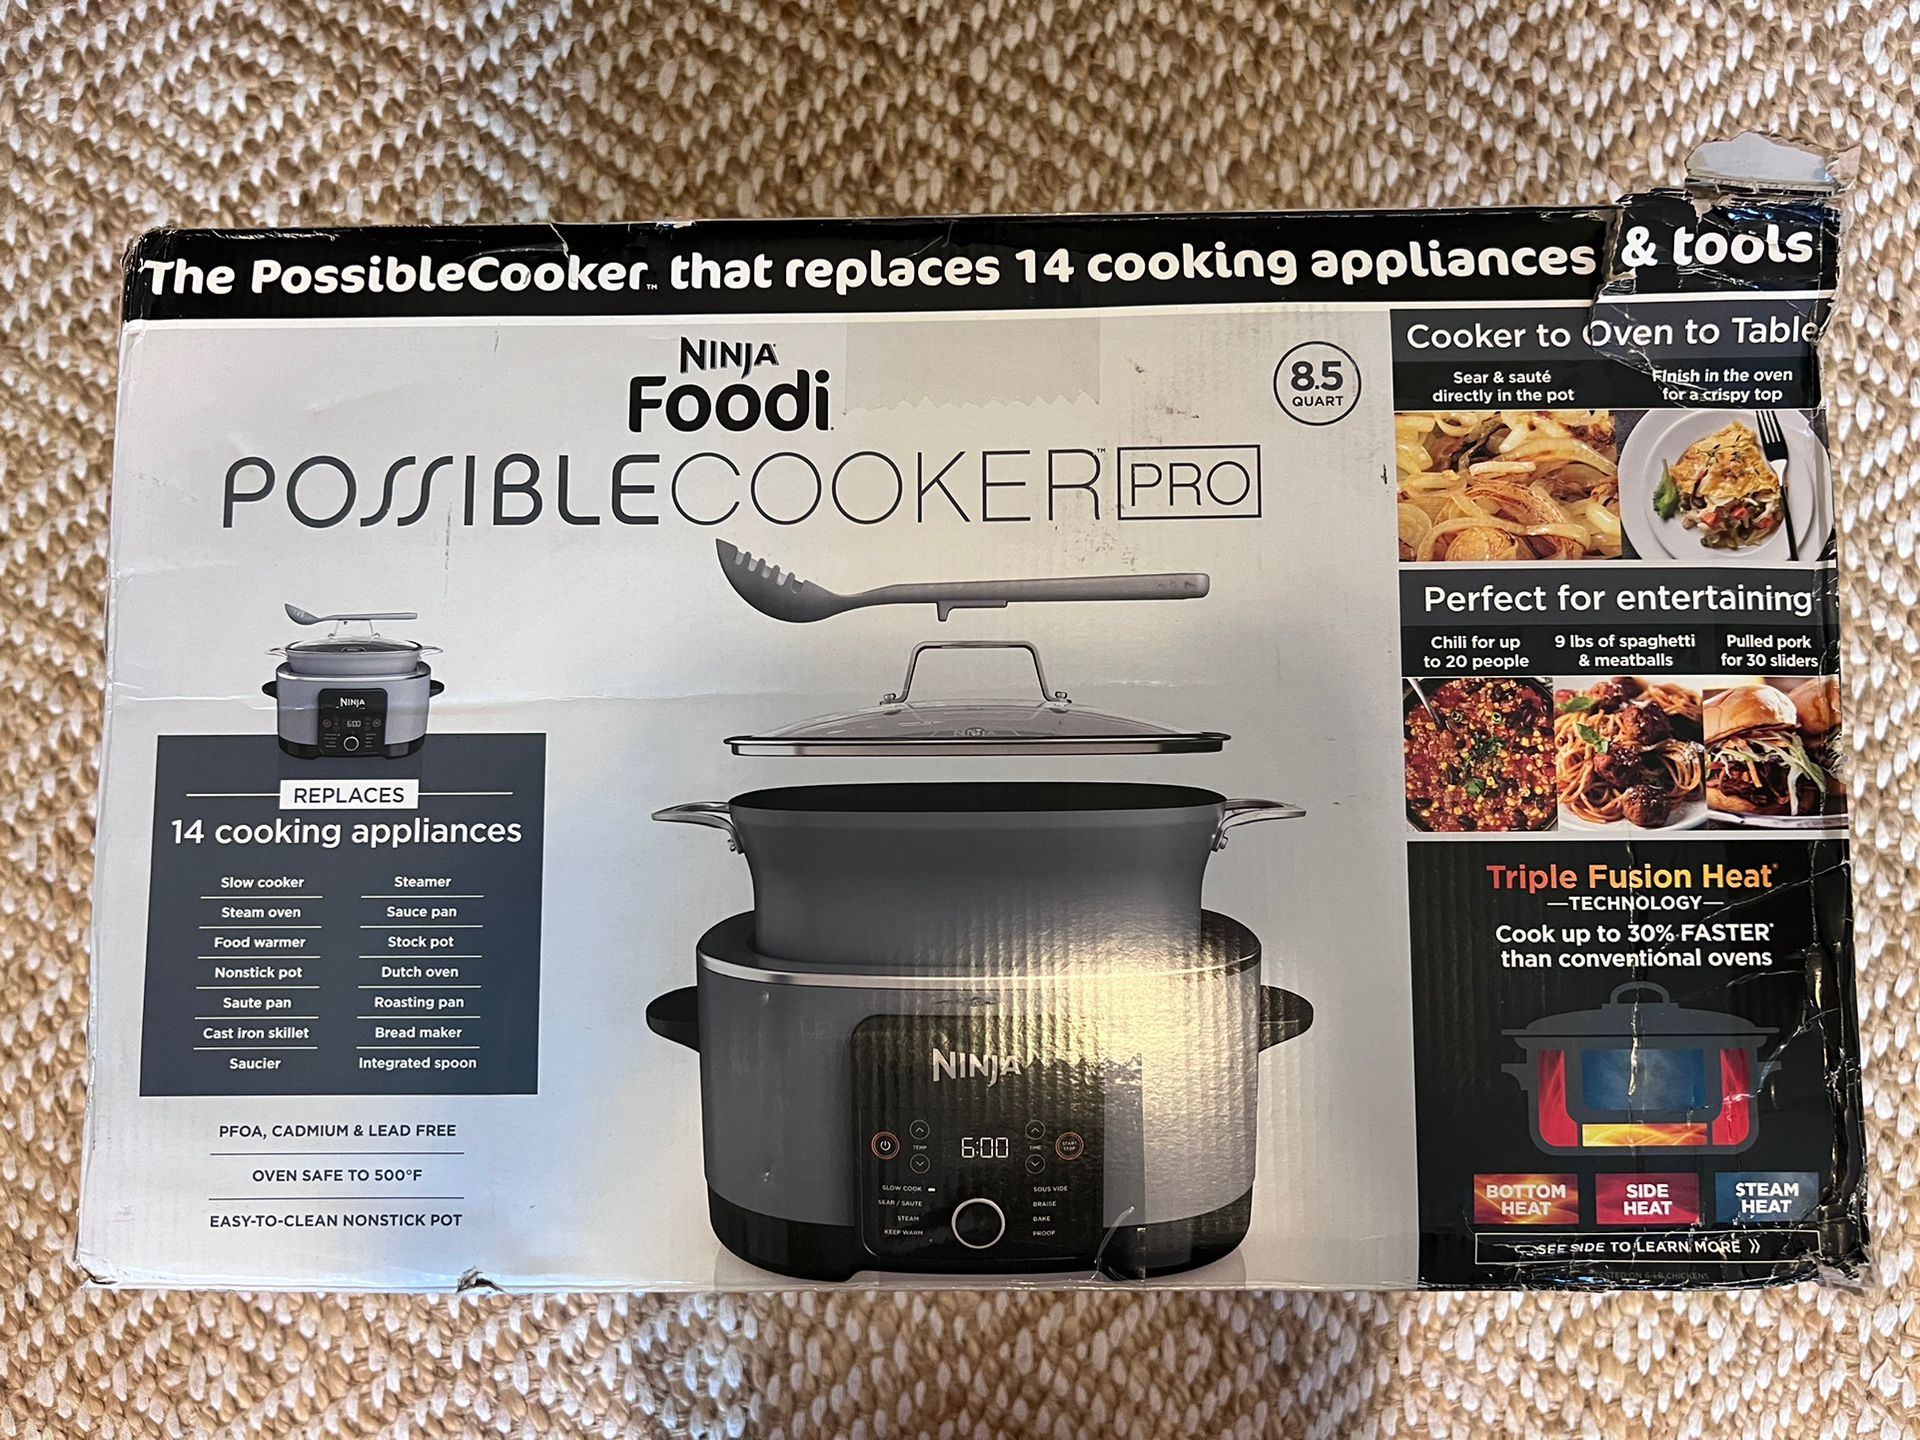 Ninja Foodi Possible Cooker PRO 8.5QT for Sale in New York, NY - OfferUp